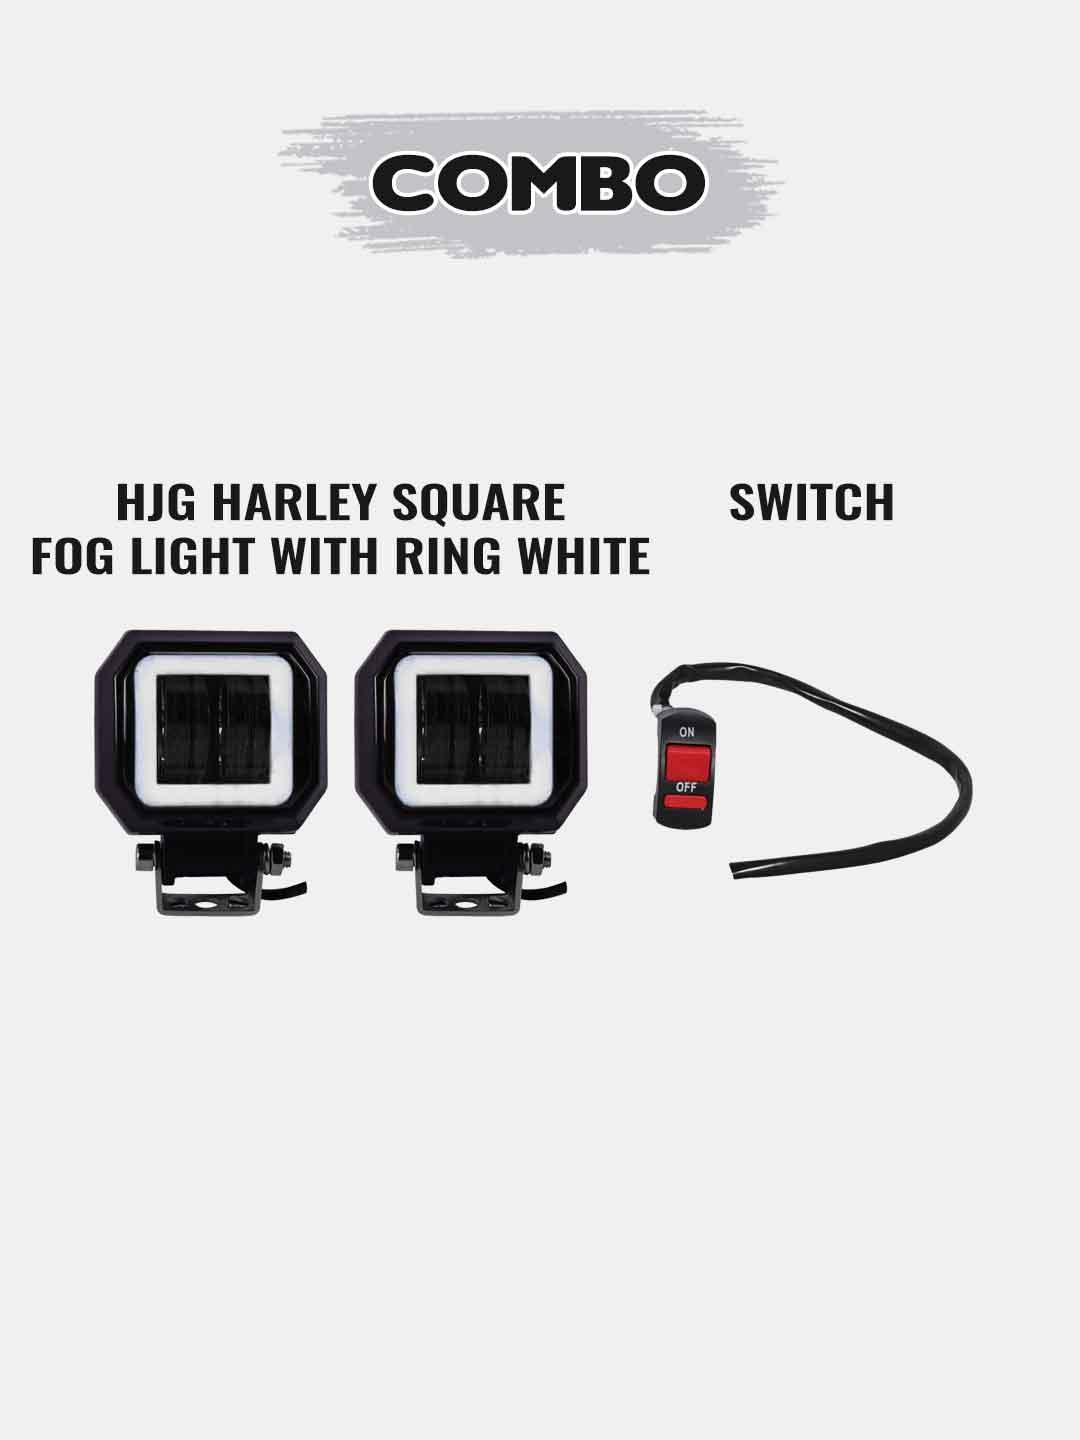 1 Pair HJG Harley Square Fog Light With Ring DRL + Auxiliary Switch - Moto Modz